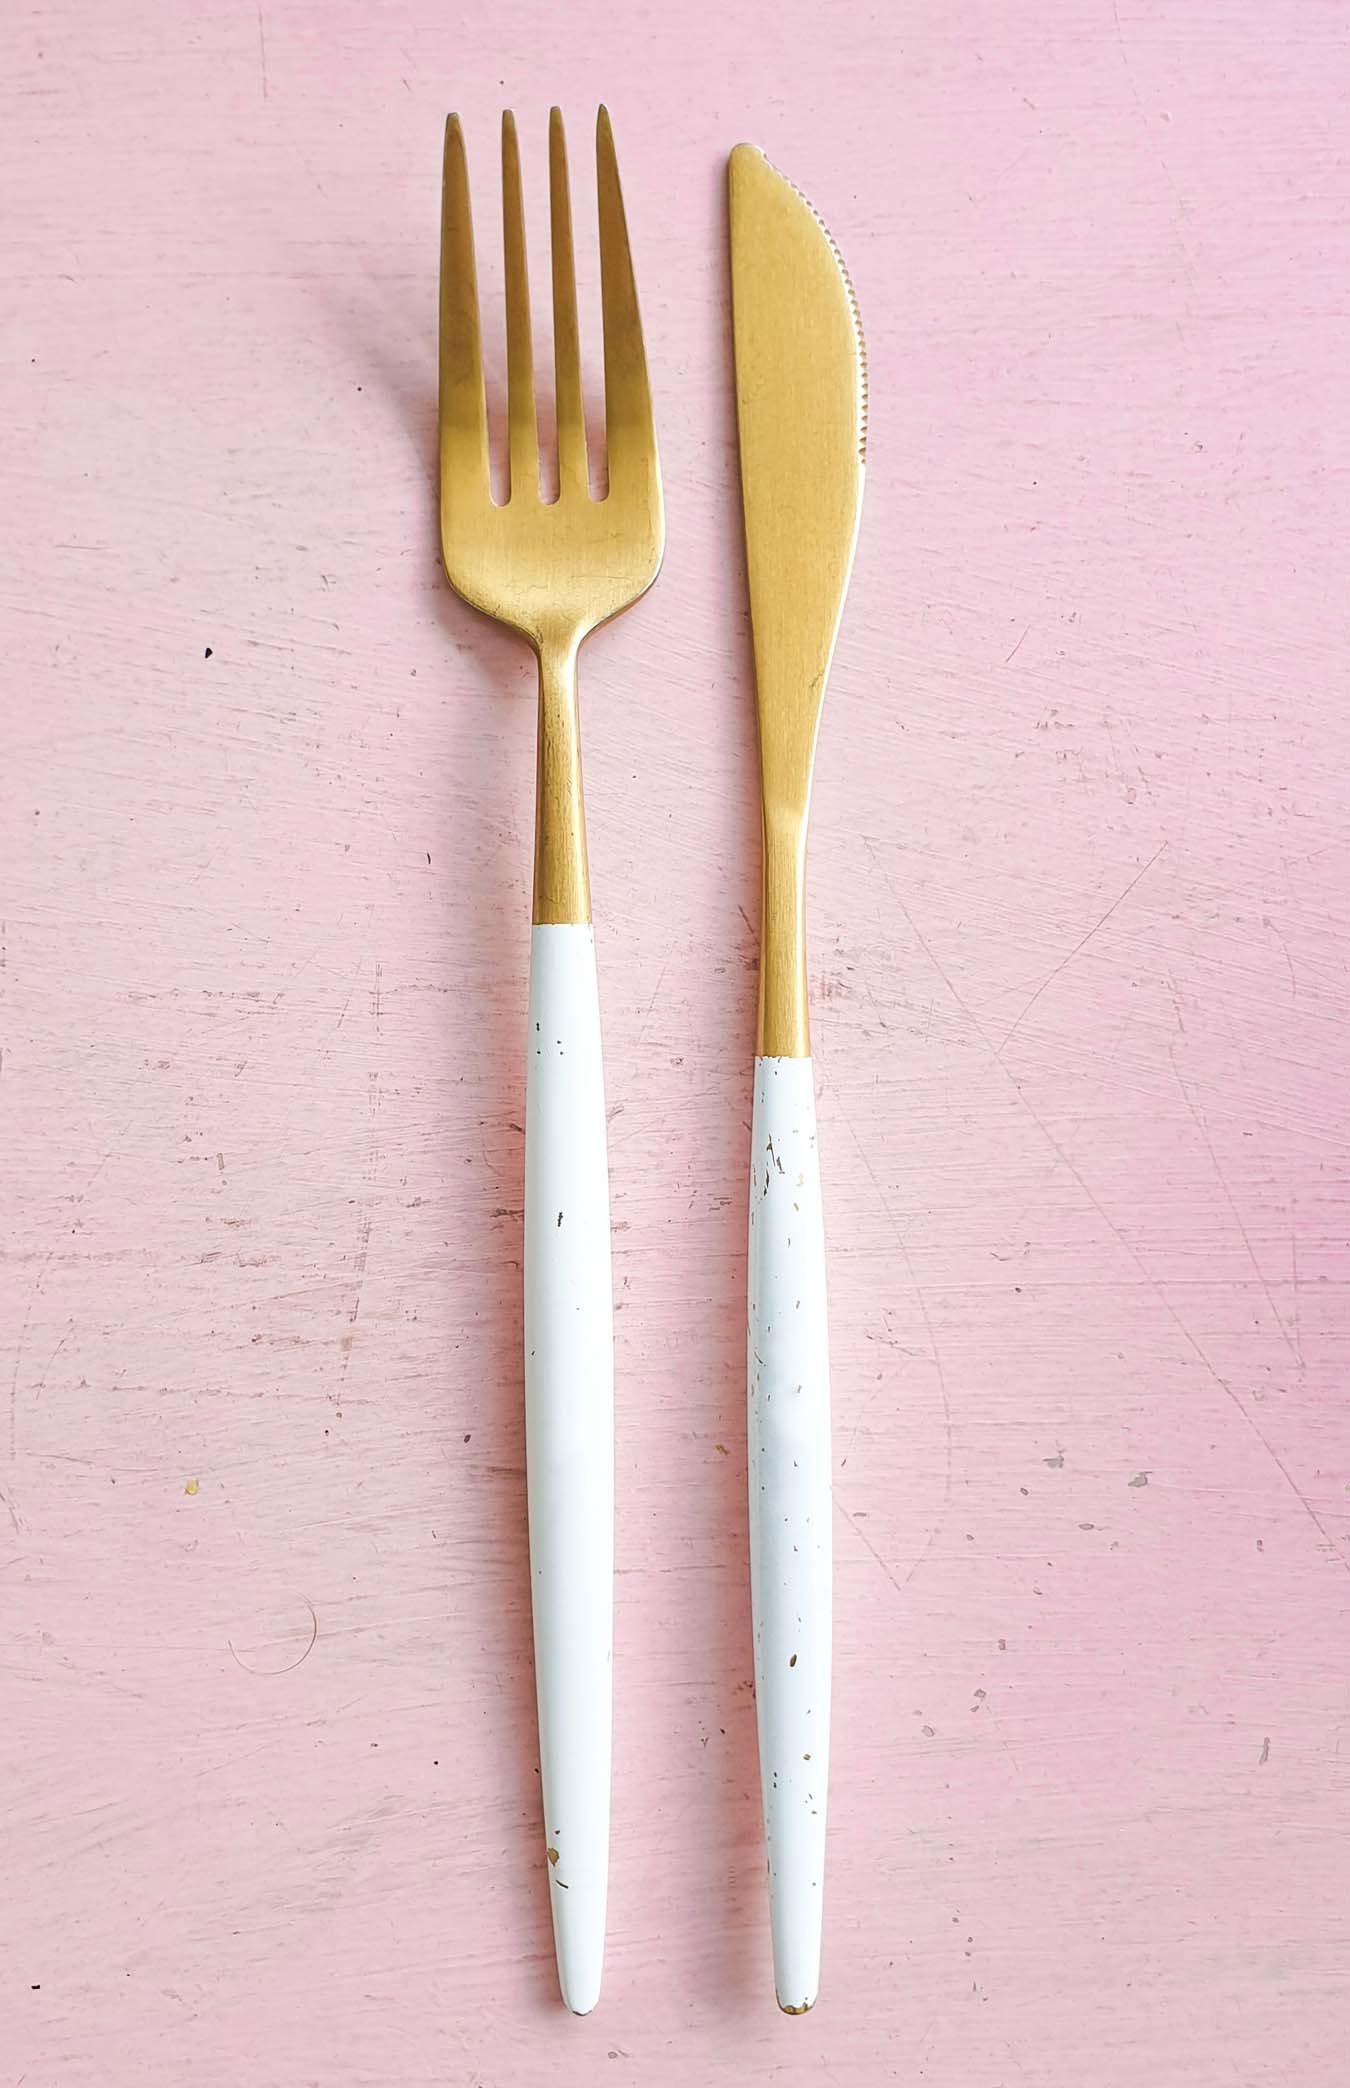 Golden fork and knife with a white handle on a rose background.